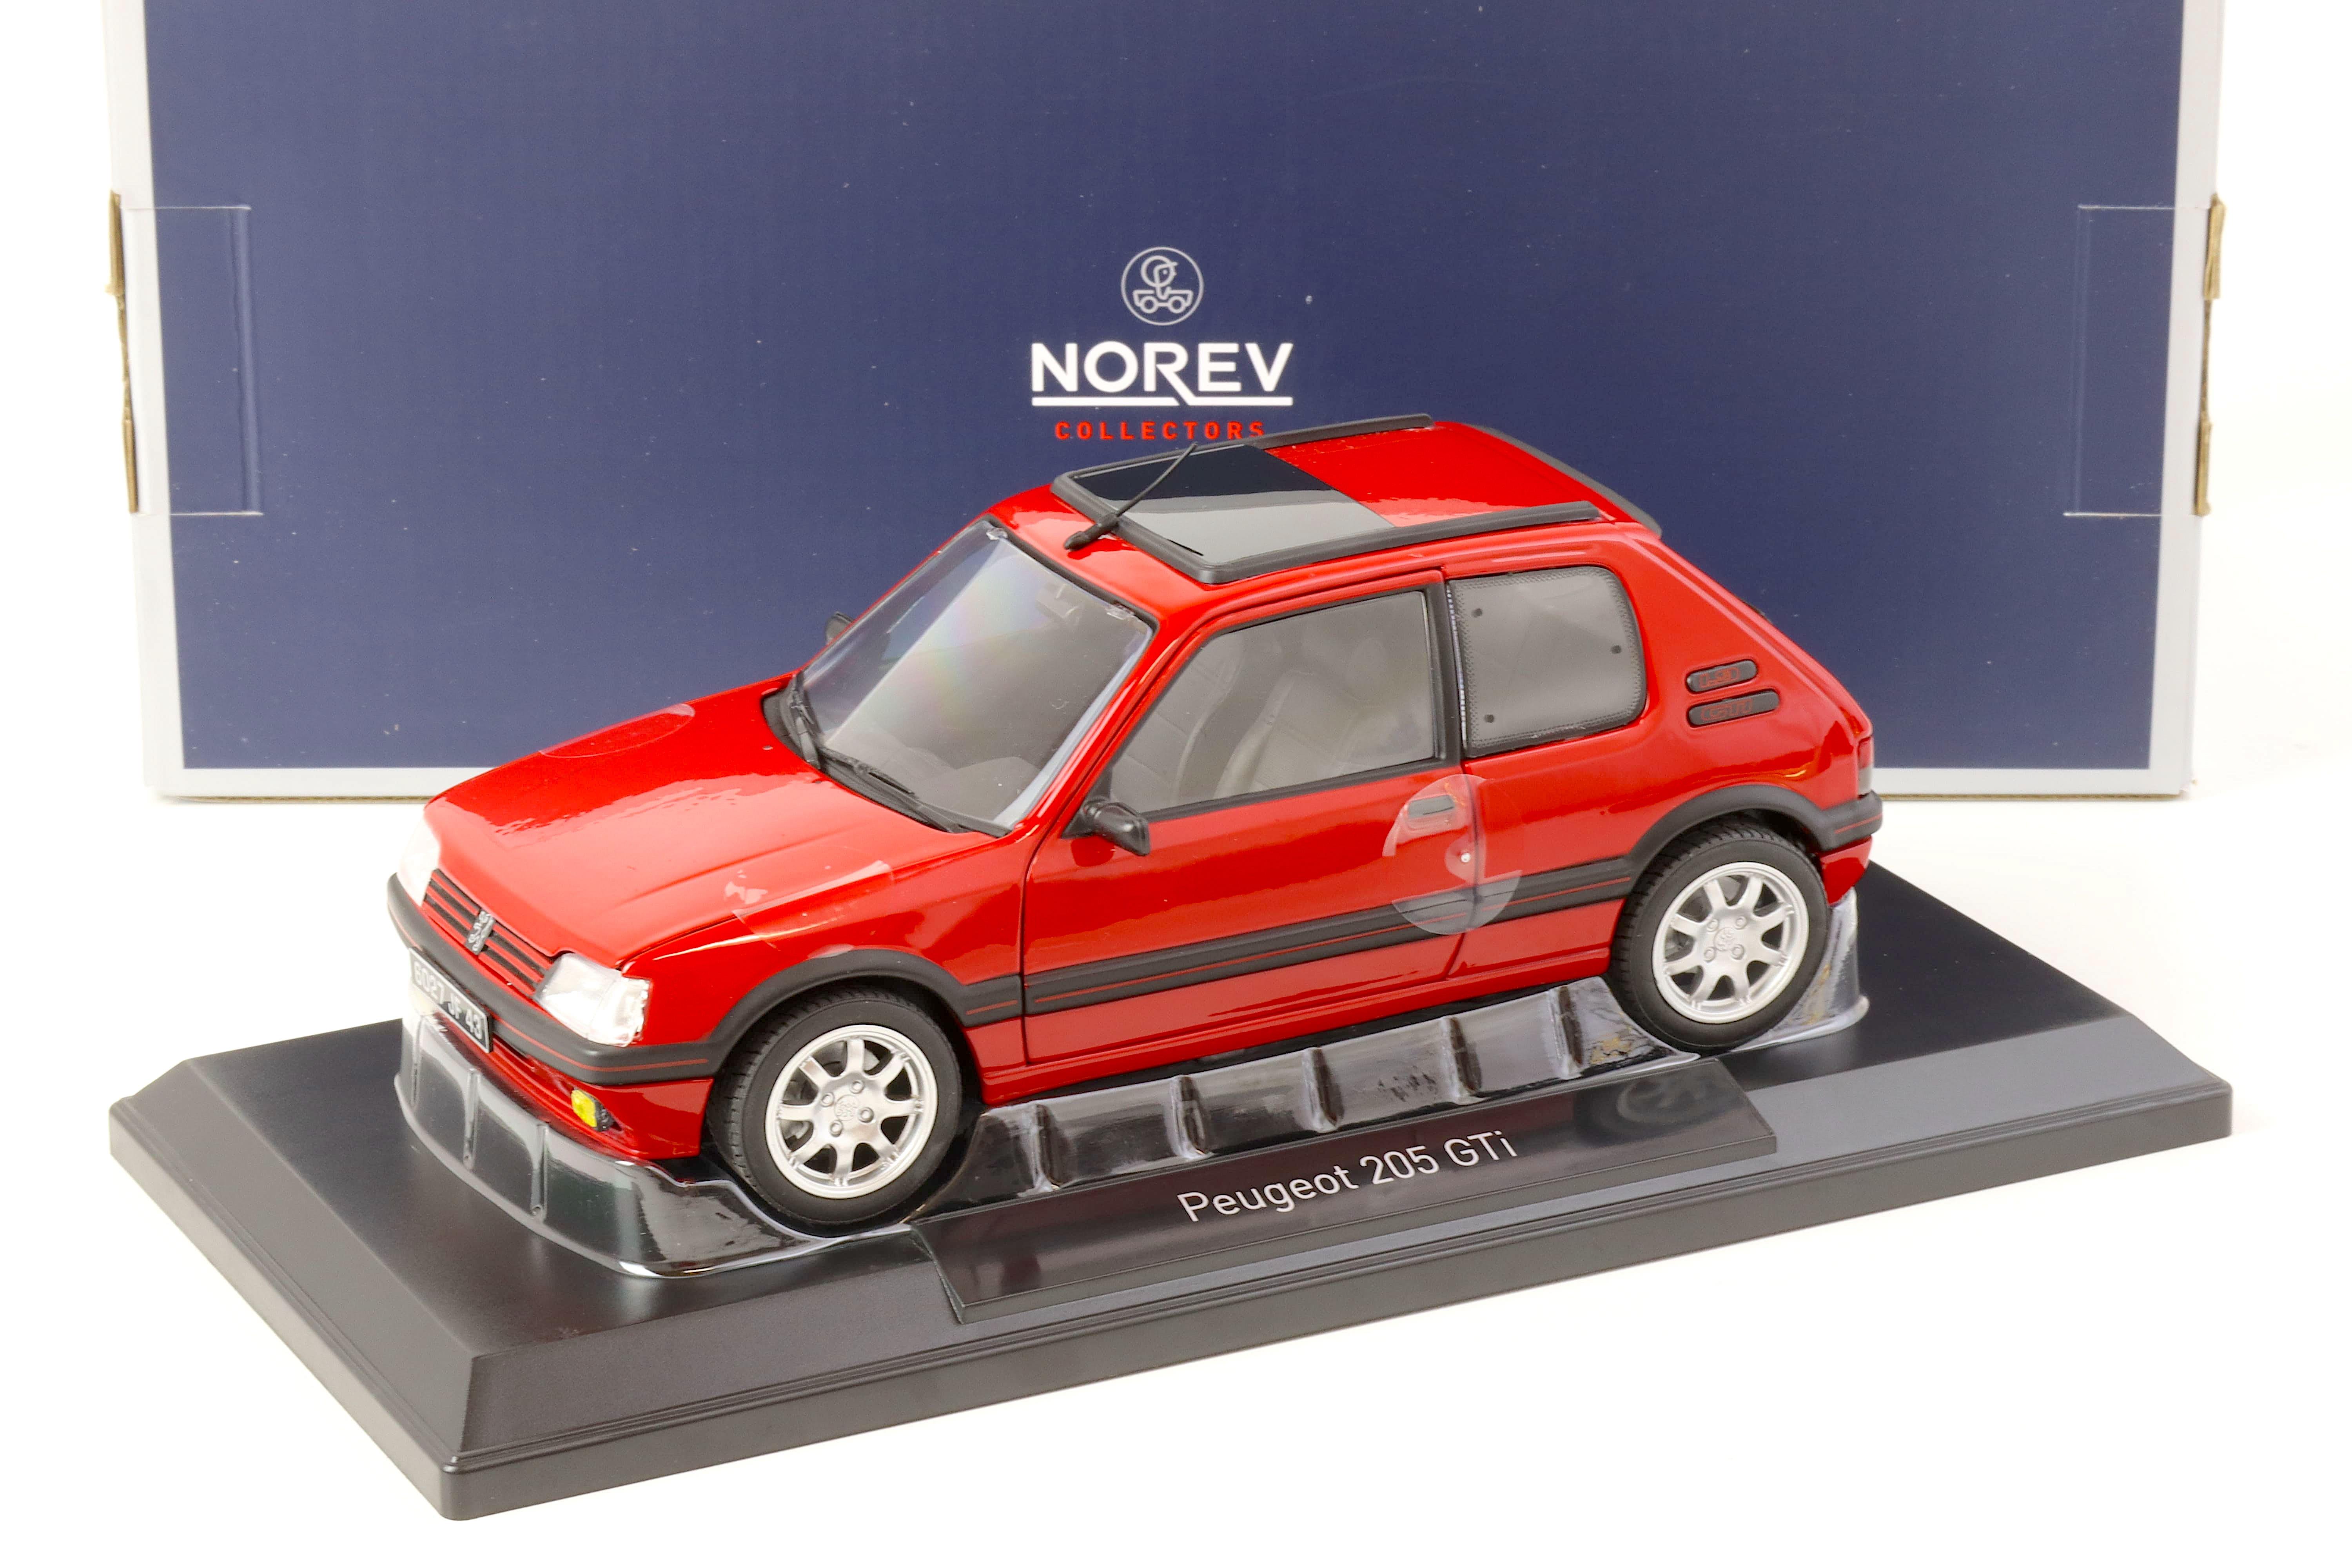 1:18 Norev Peugeot 205 GTI 1.9 PTS Rims 1991 red 184848